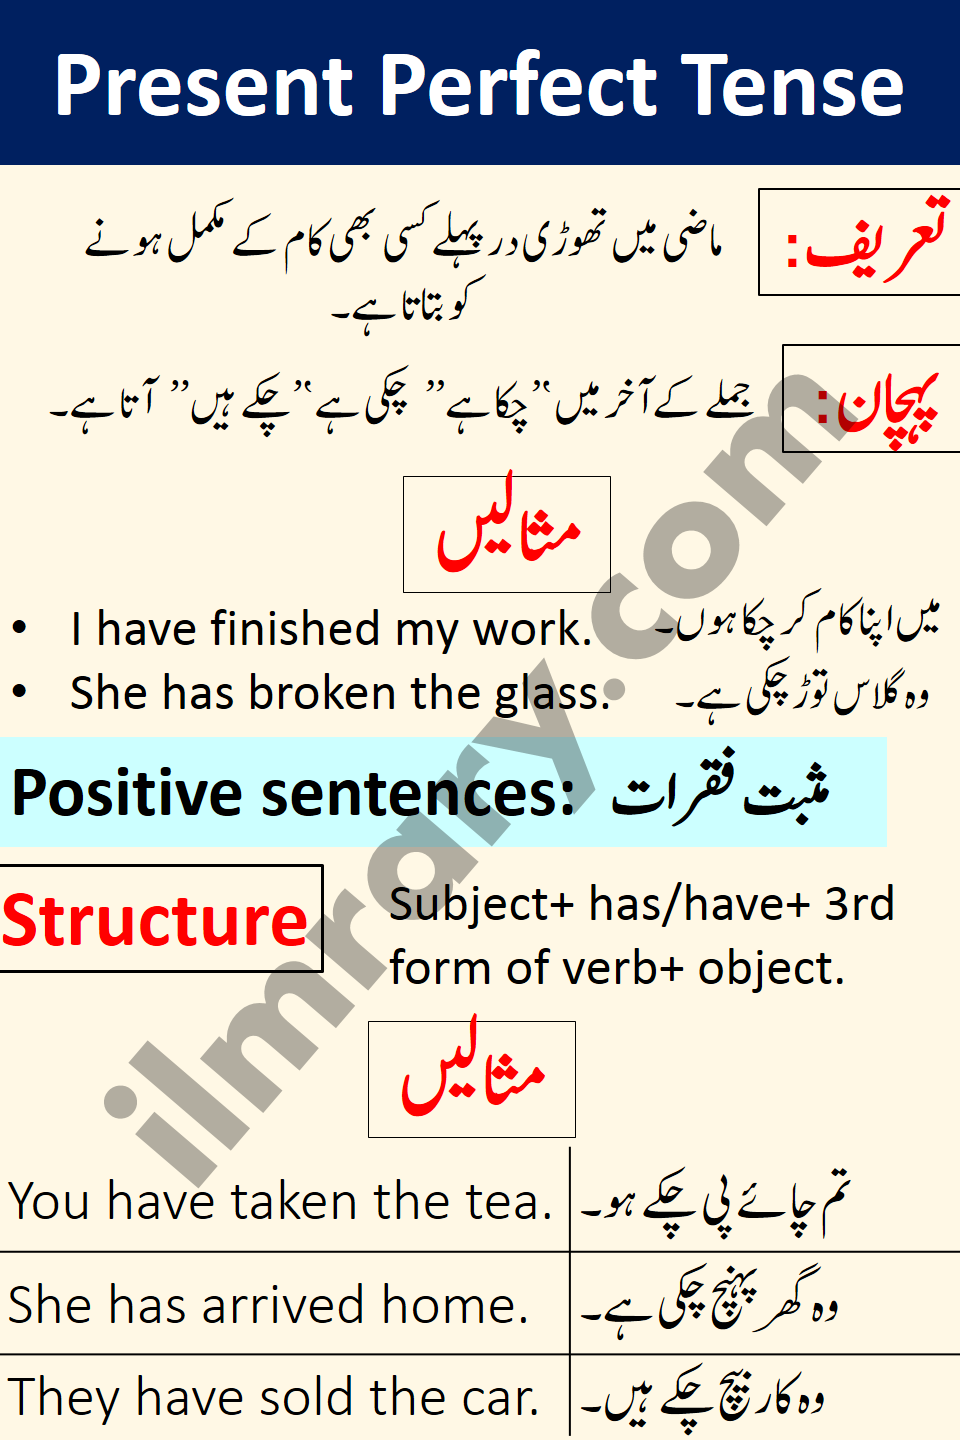 Positive Examples for Present Perfect Tense in Urdu 